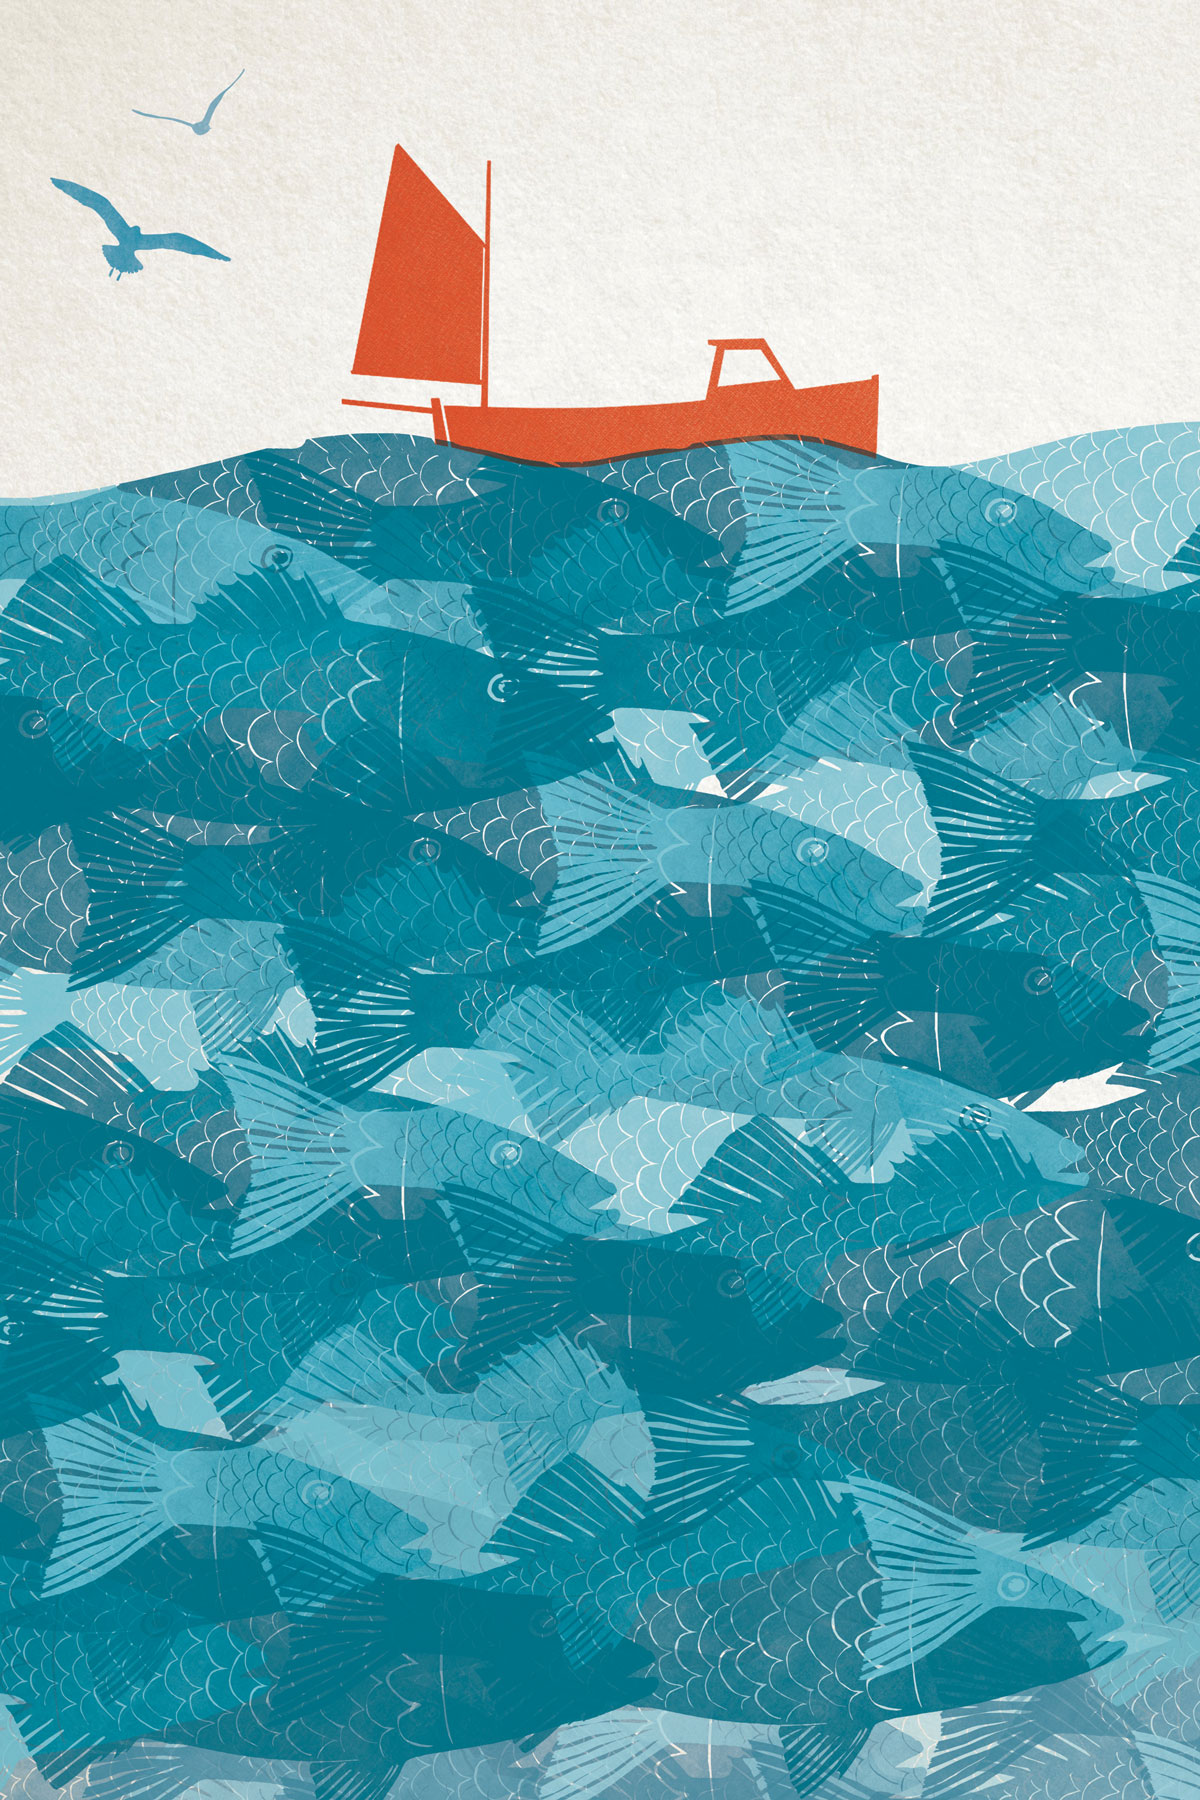 illustration of an orange fishing boat floating upon a sea of illustrated fish.